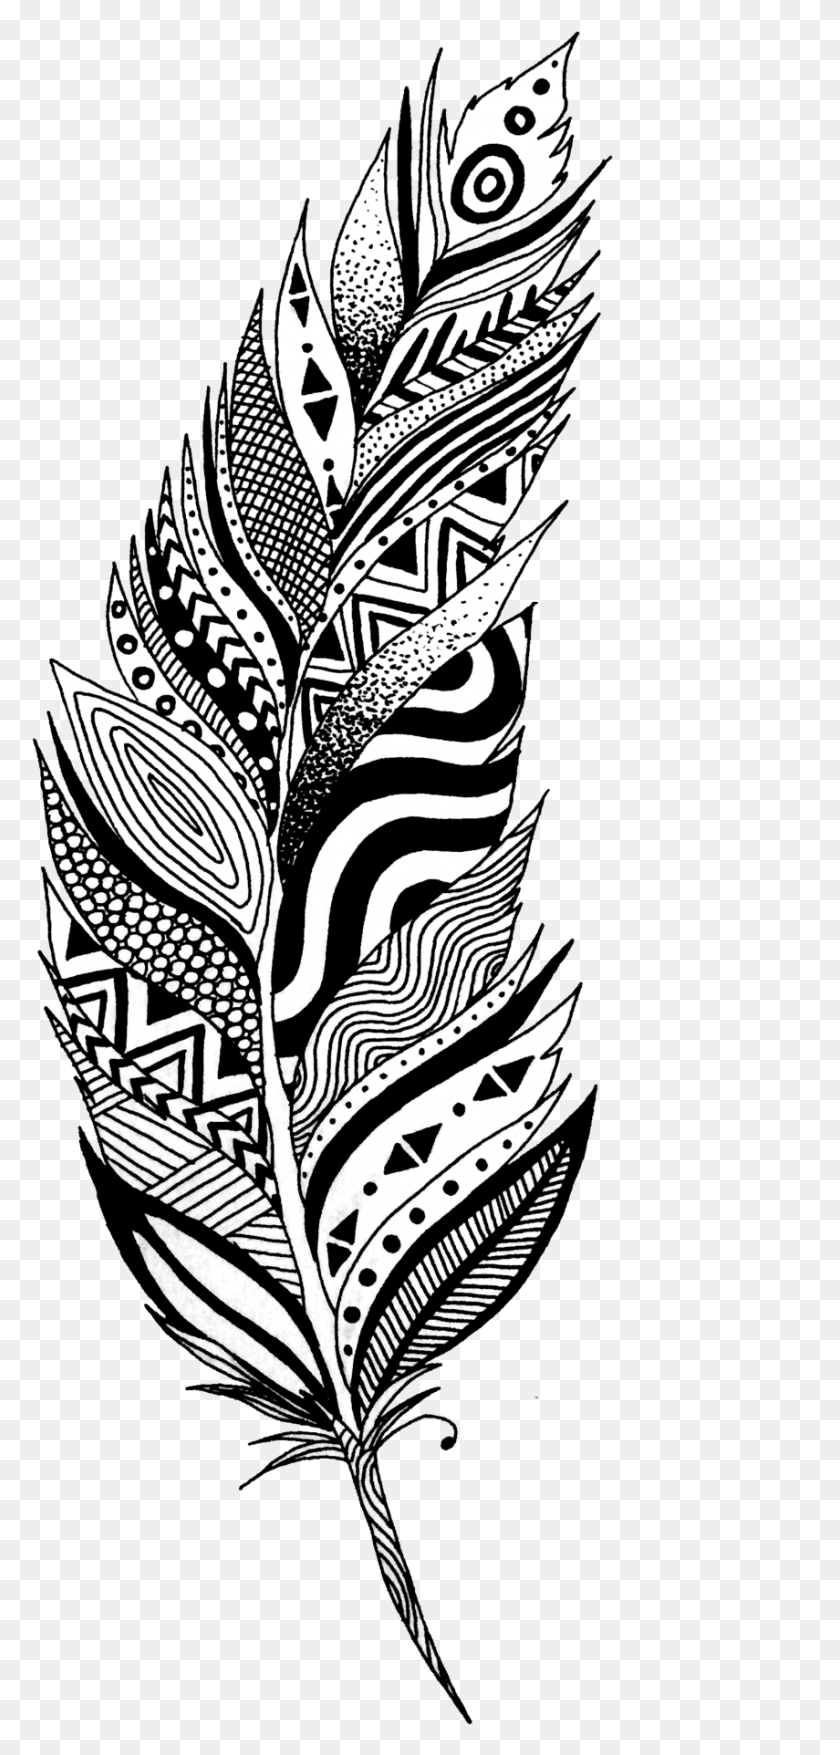 Black And White Feather Tattoo Design Black And White Feather Clipart